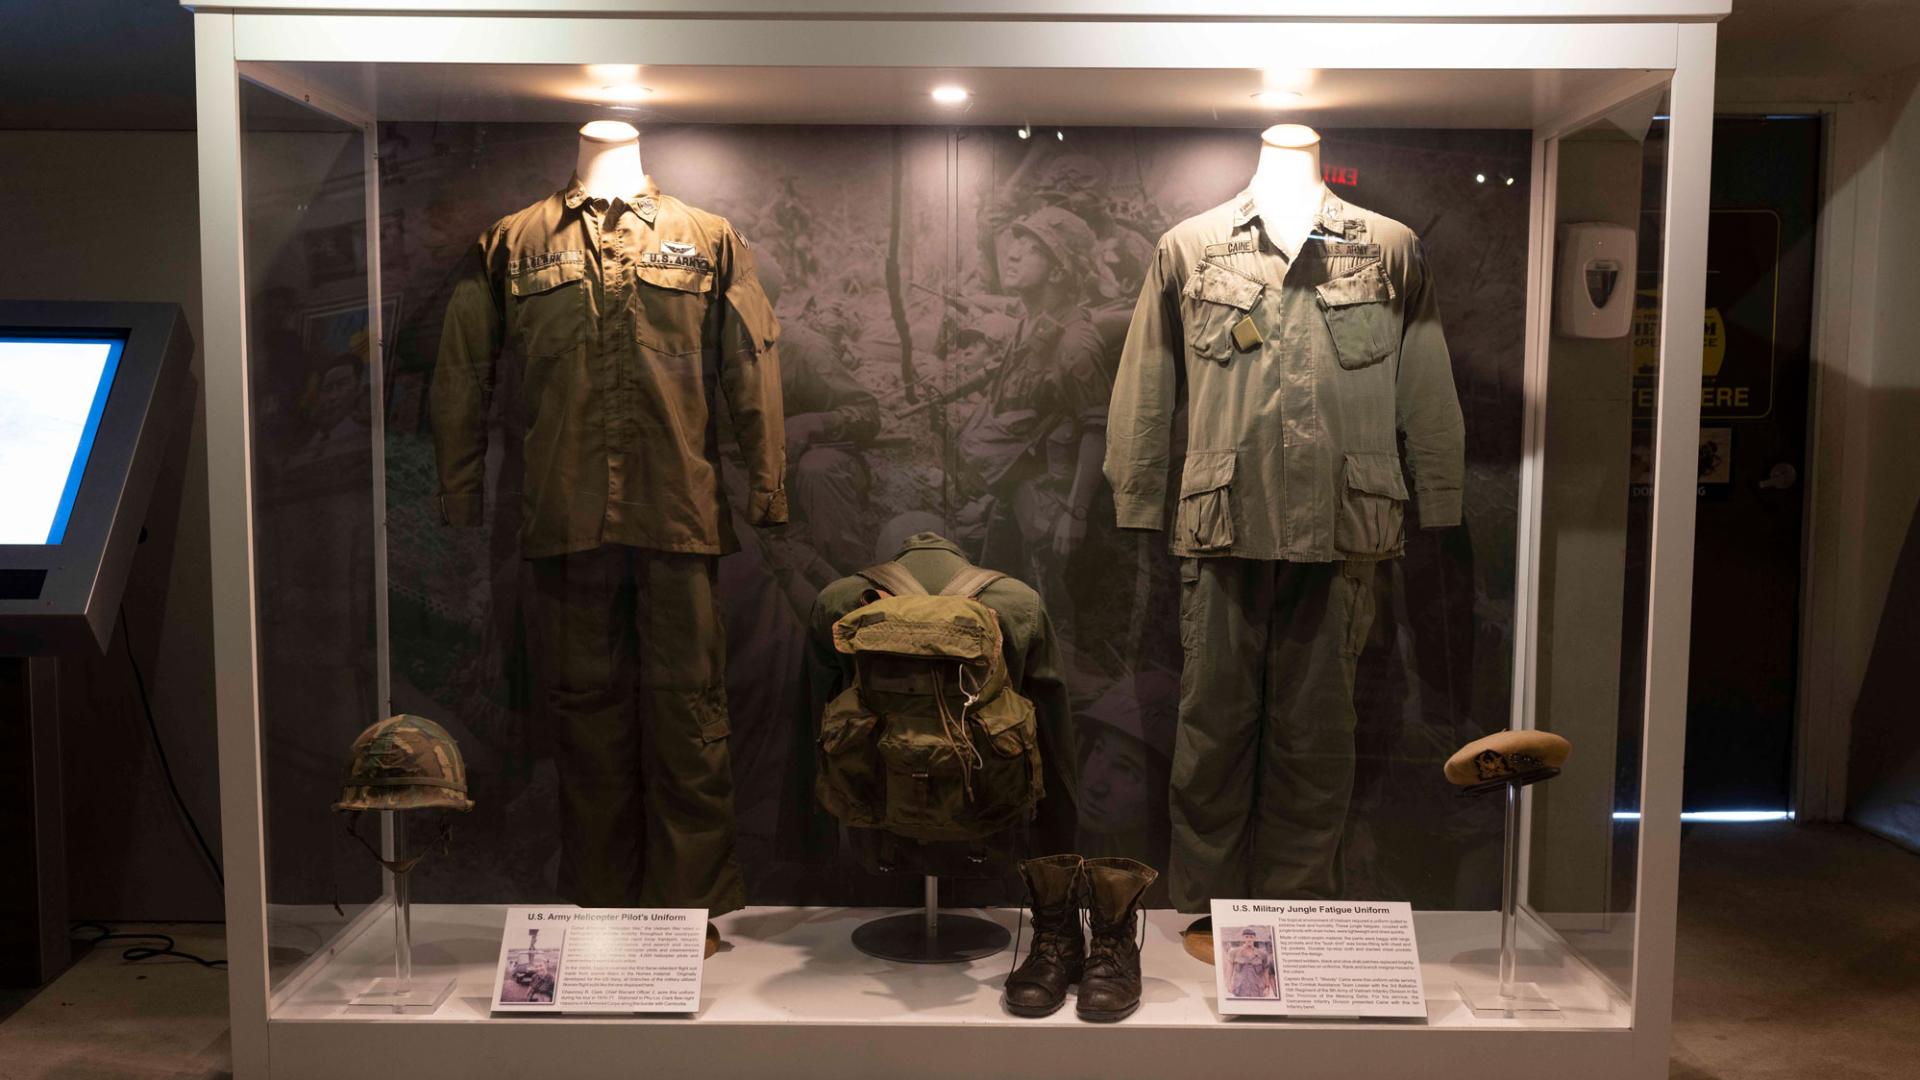 2 military uniforms behind glass in a museum